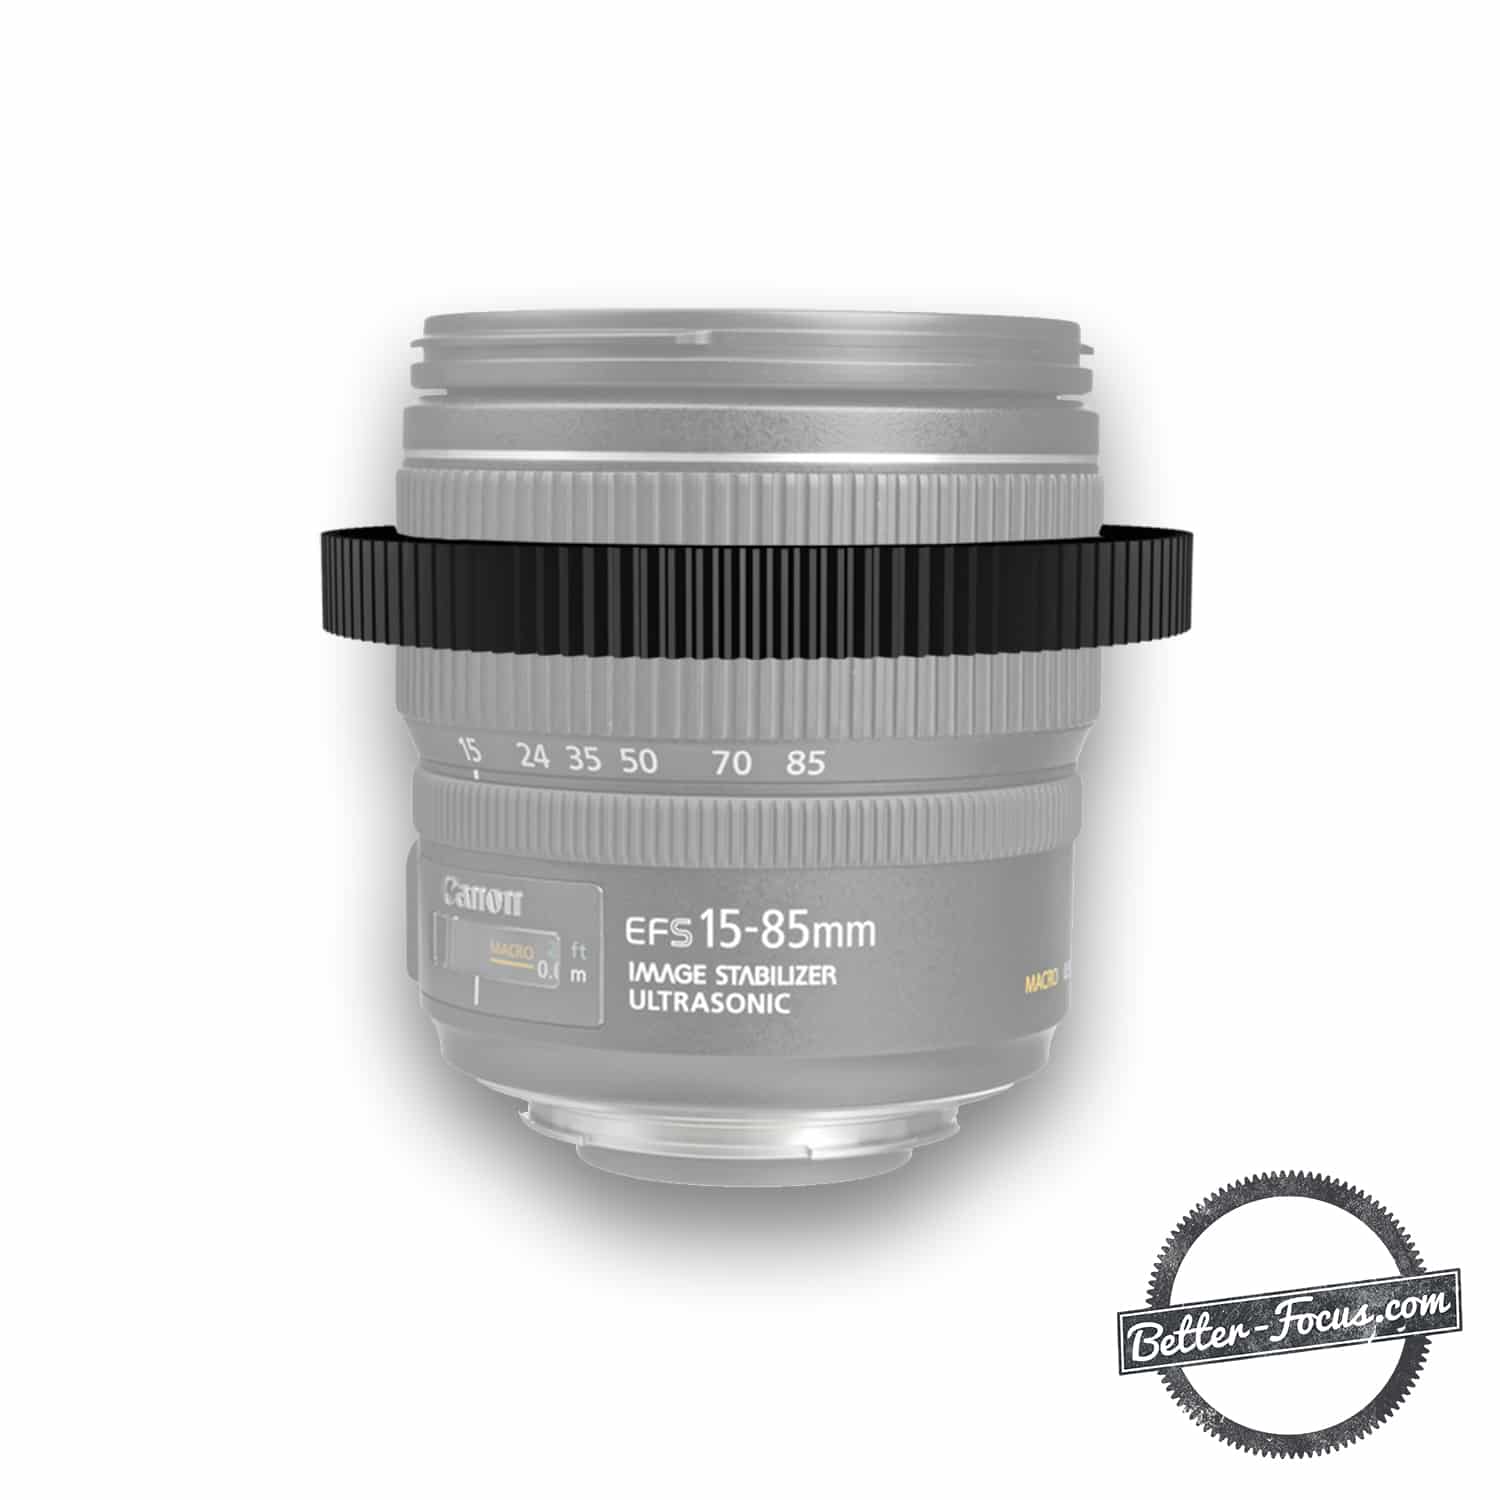 Follow Focus Gear for CANON EF-S 15-85MM F3.5-5.6 IS USM  lens